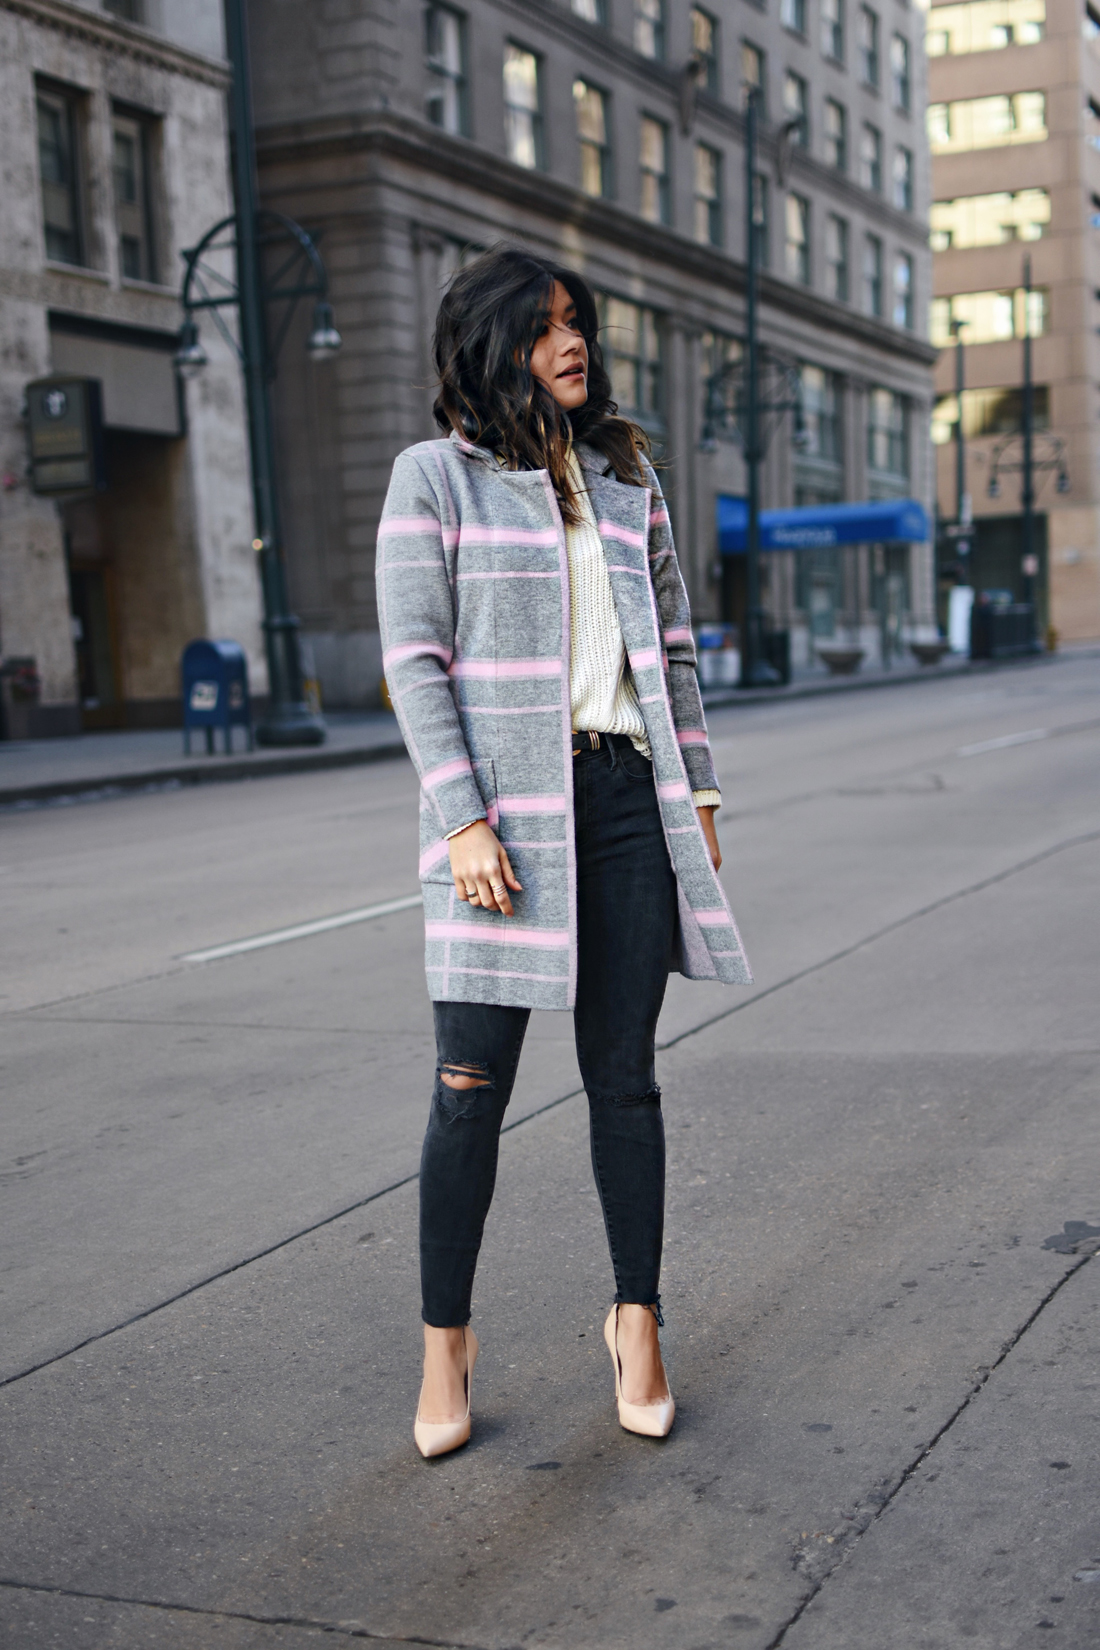 Carolina Hellal of Chic Talk wearing a Chicwish plaid coat, Madewell jeans, Sam Edelman nude pumps and Vince knit sweater